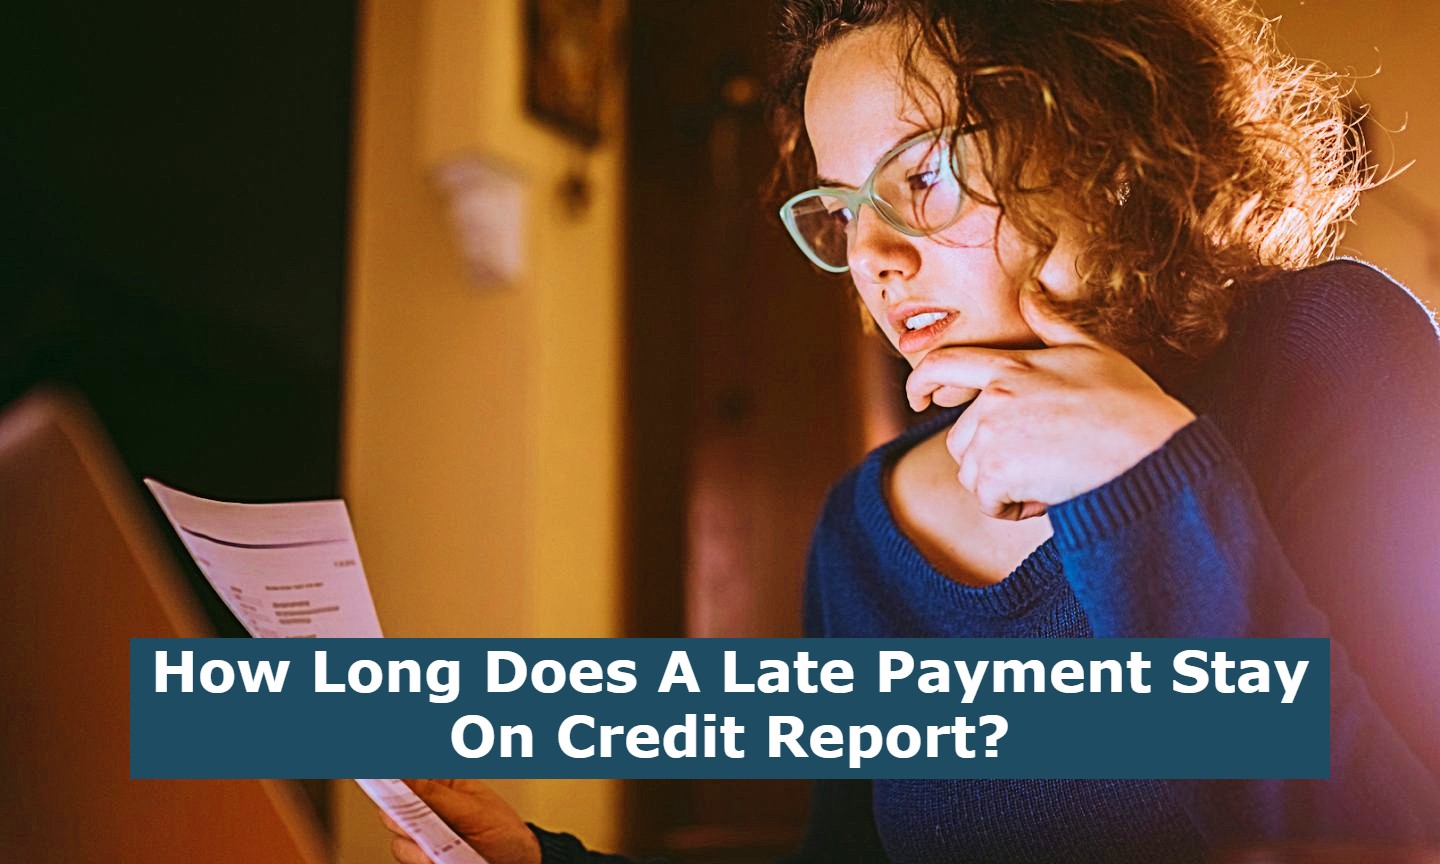 How Long Does A Late Payment Stay On Credit Report?